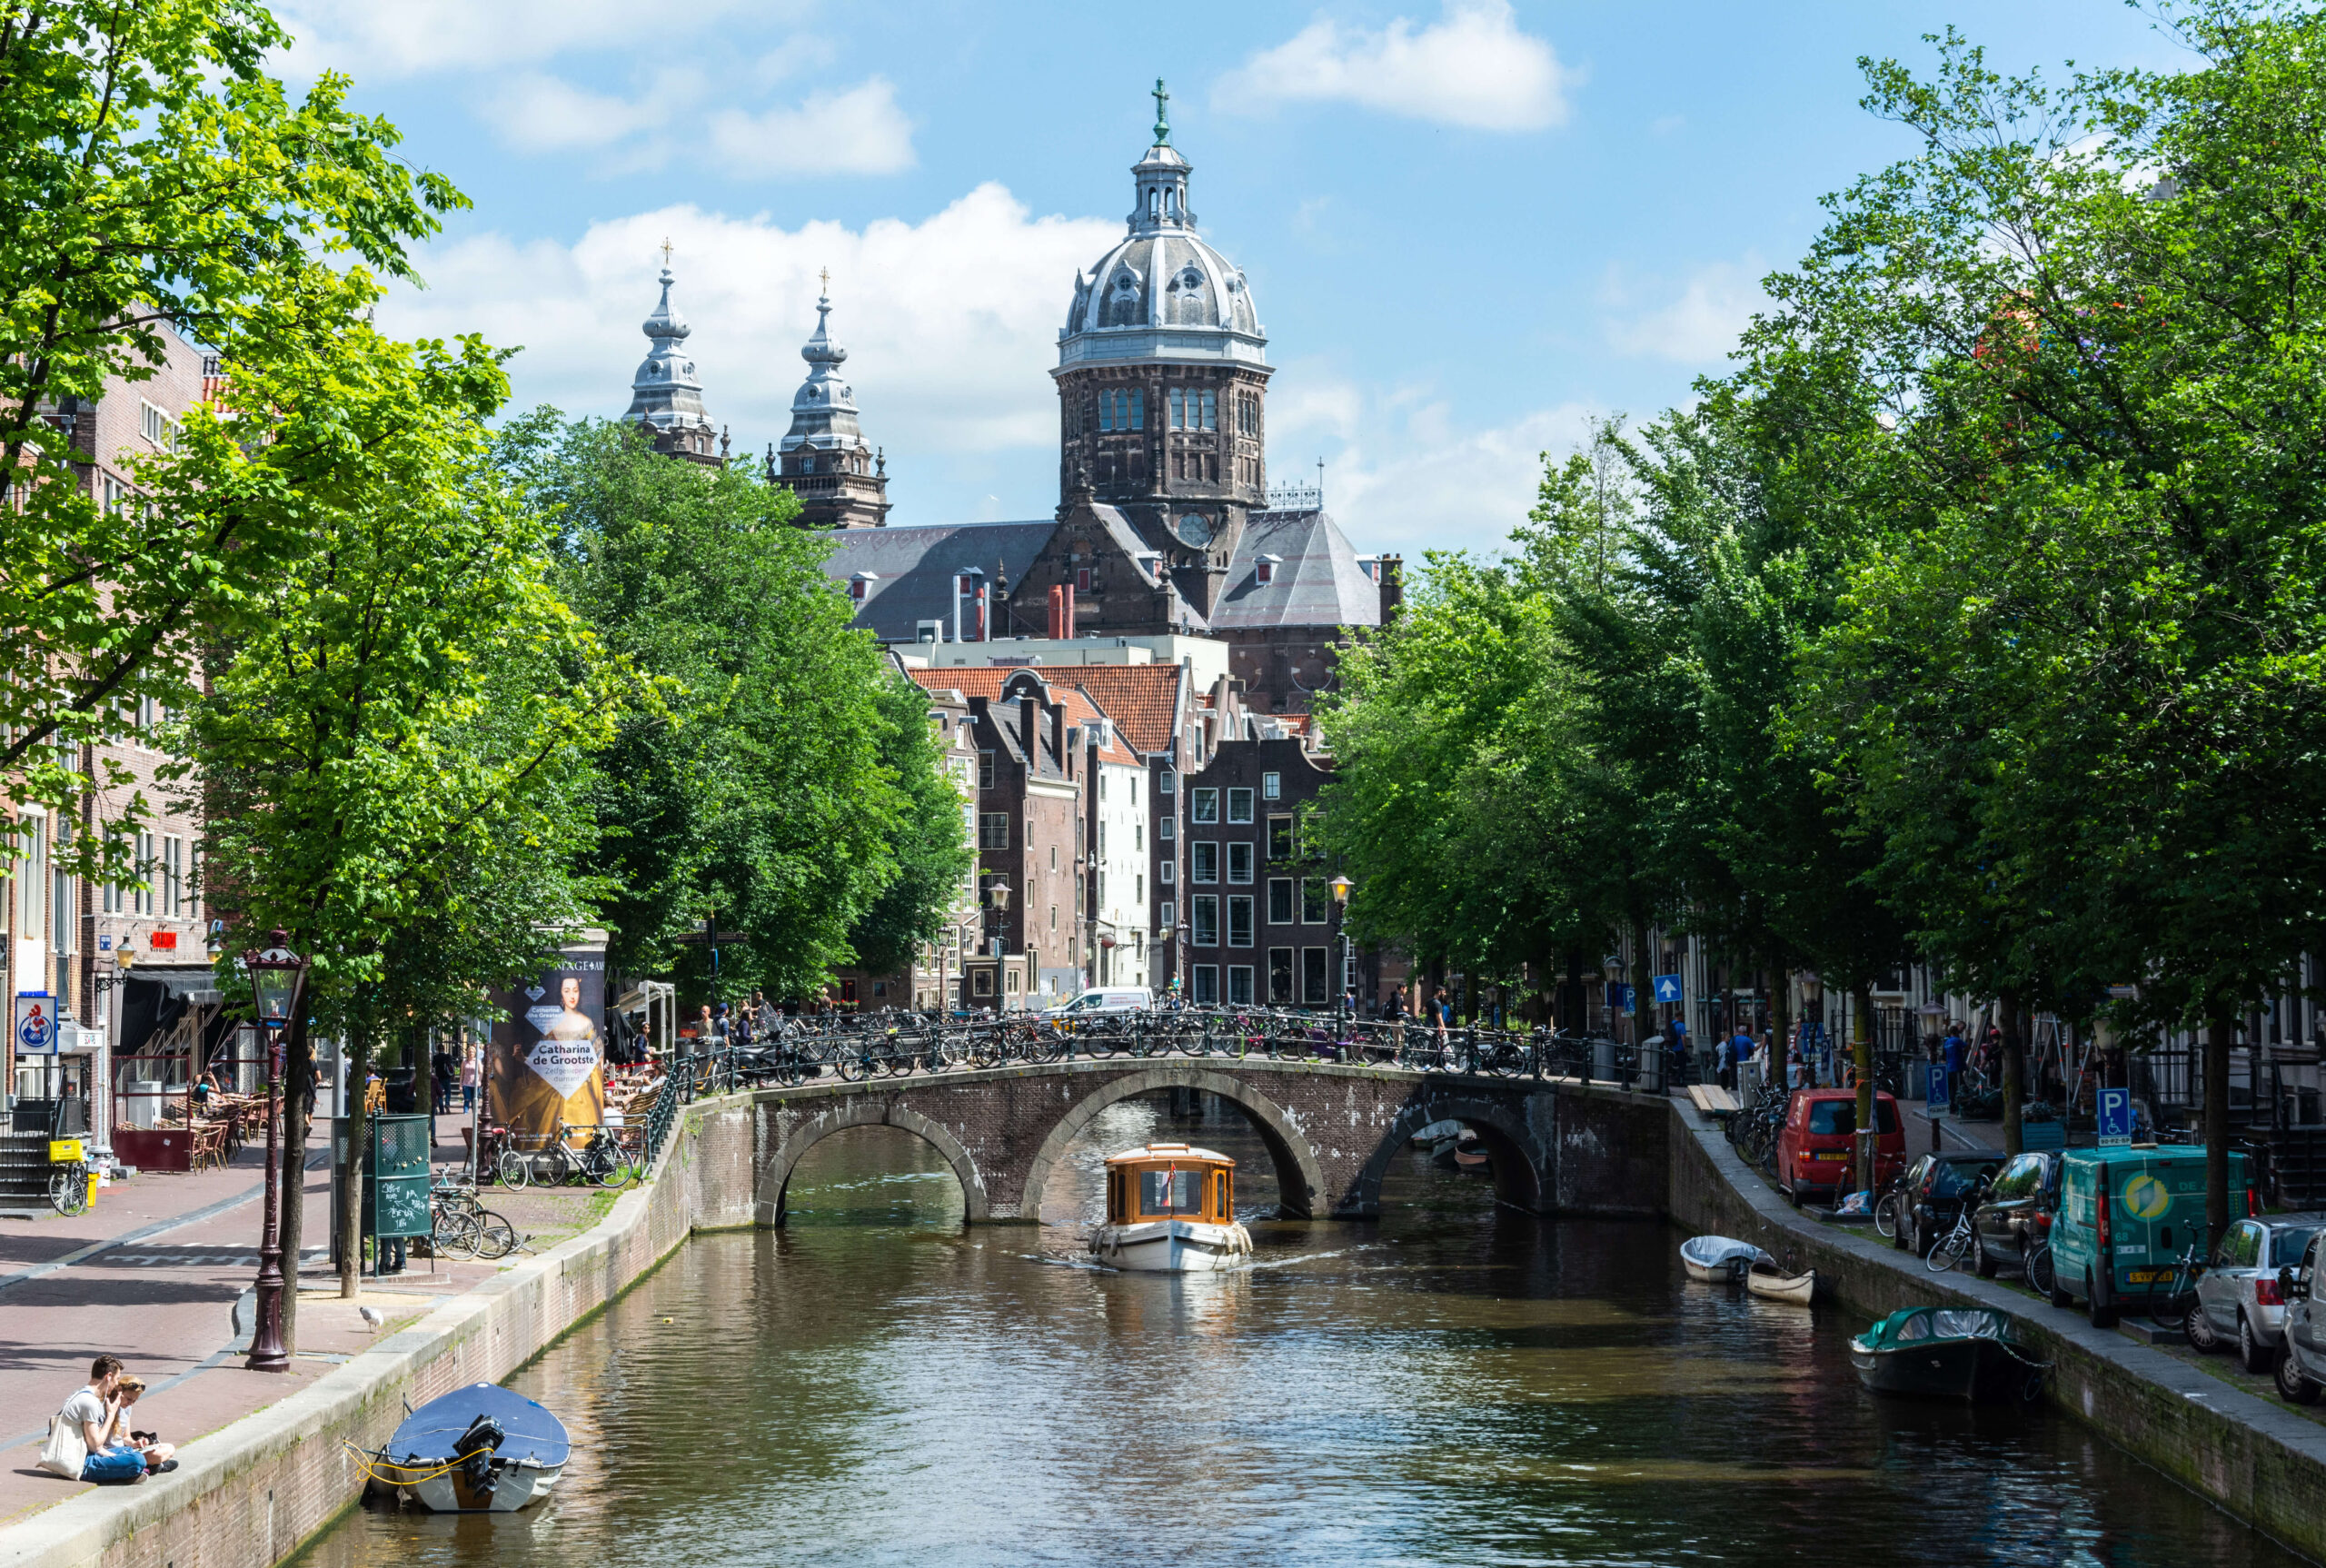 The Canals of Amsterdam - Amsterdam Tourist Information